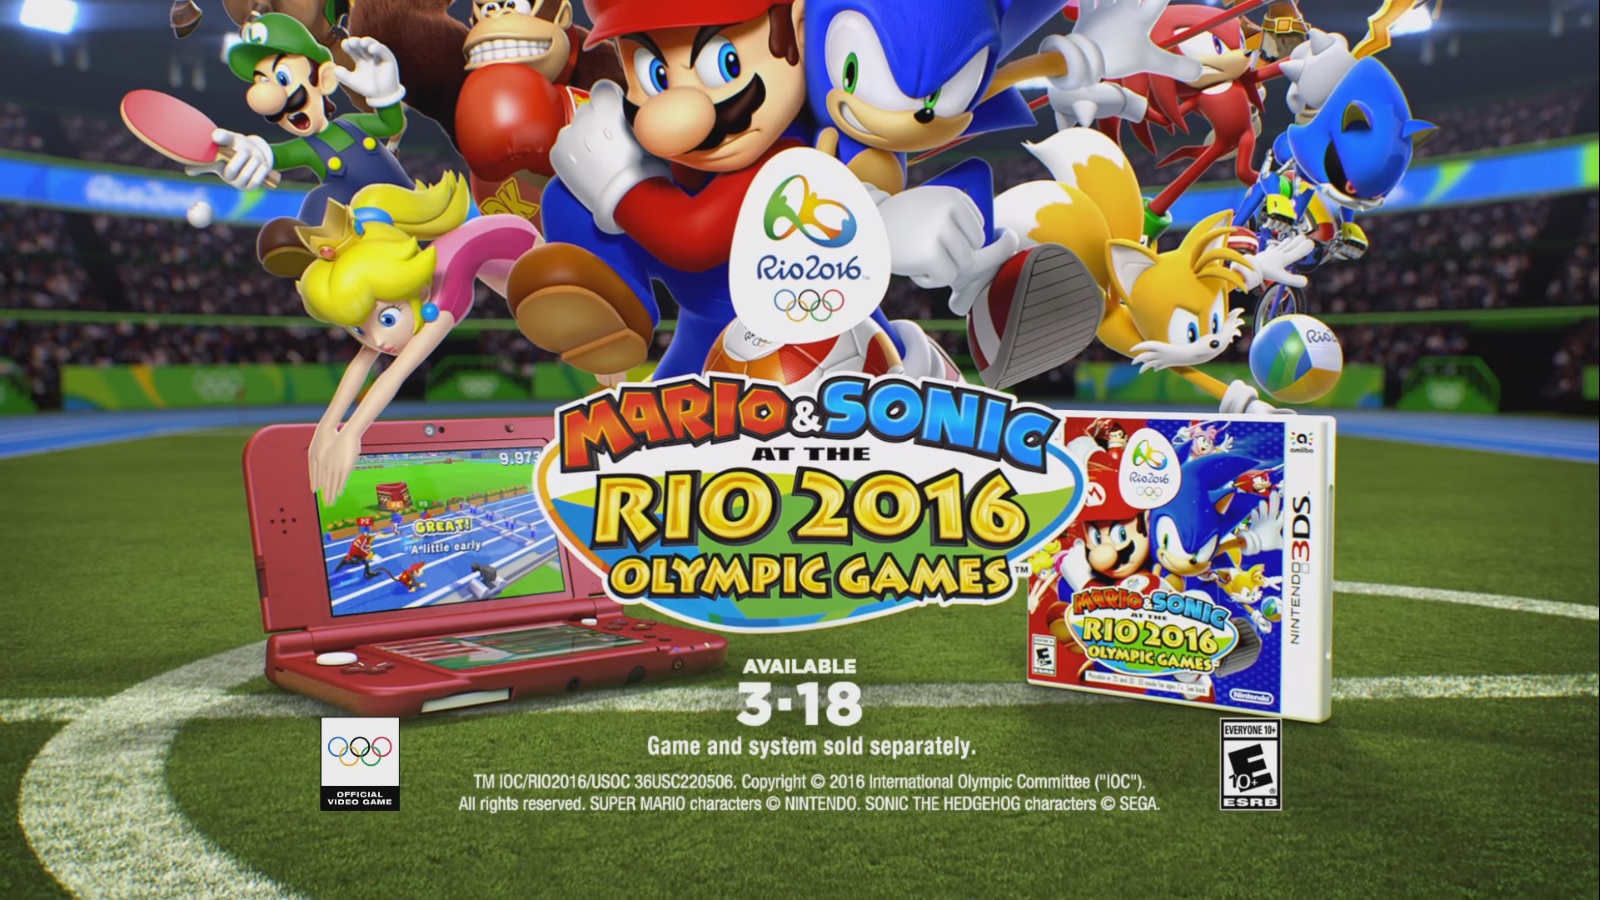 mario and sonic at the rio 2016 olympic games 3ds